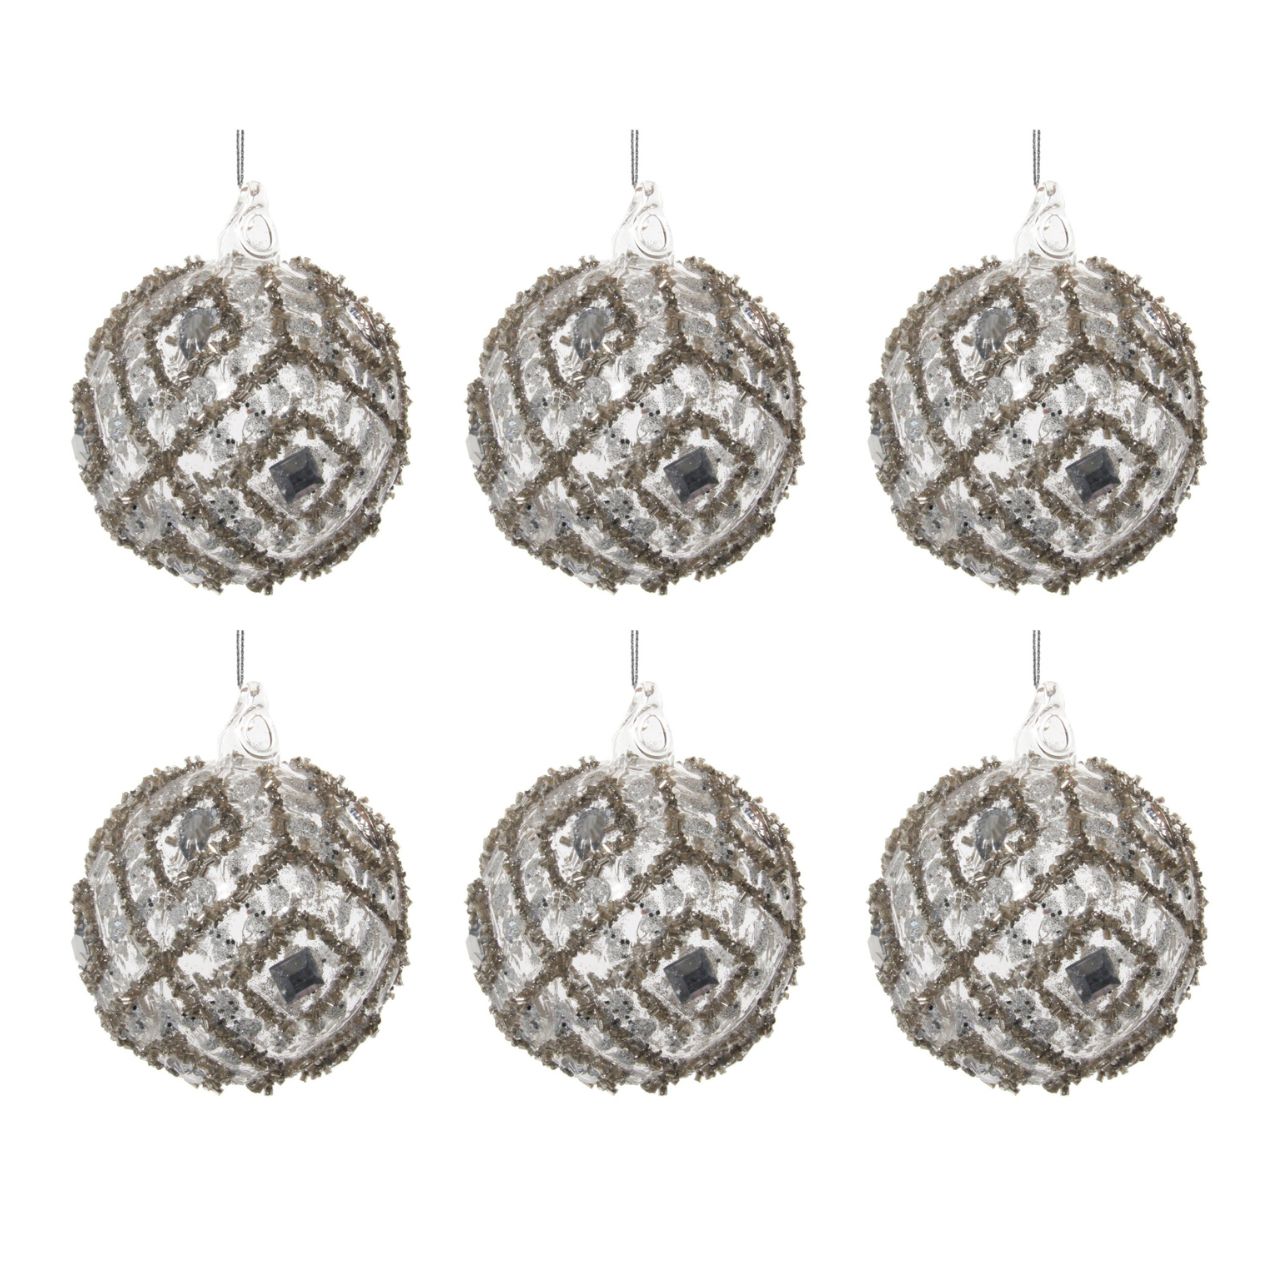 Shishi Clear Glass Bauble with Silver Gems Hanging Ornament Set of 6  Browse our beautiful range of luxury festive Christmas tree decorations, baubles & ornaments for your tree this Christmas.